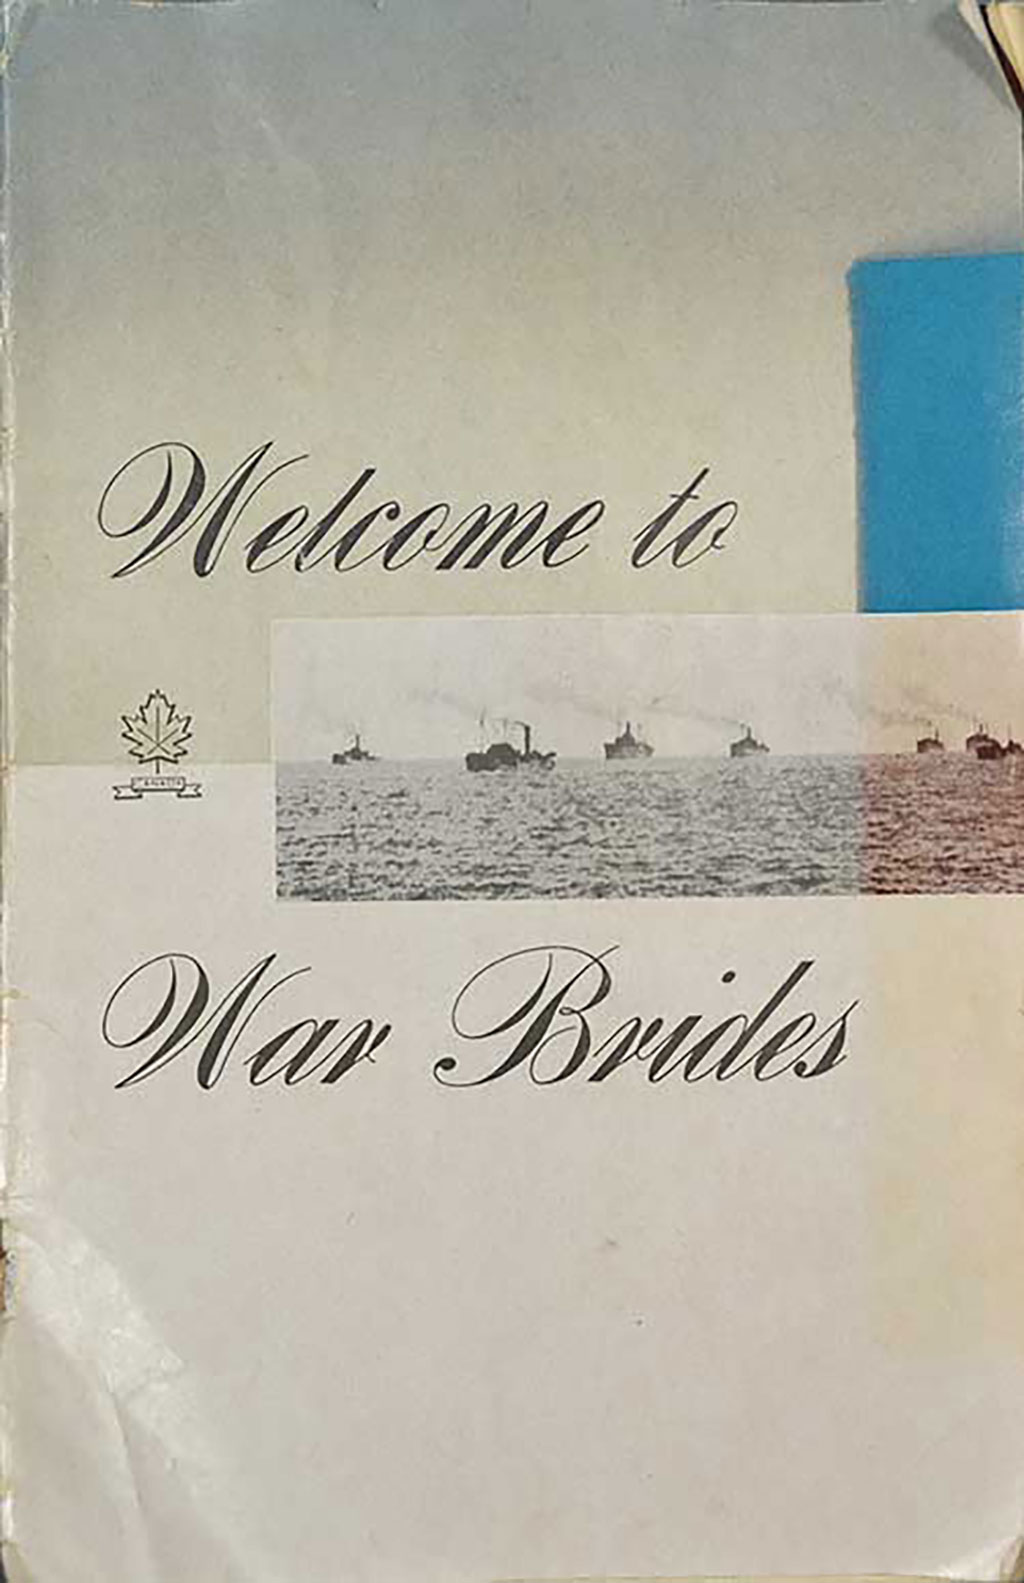 An old creased pamphlet with images of ships on it and a small drawing of a maple leaf.